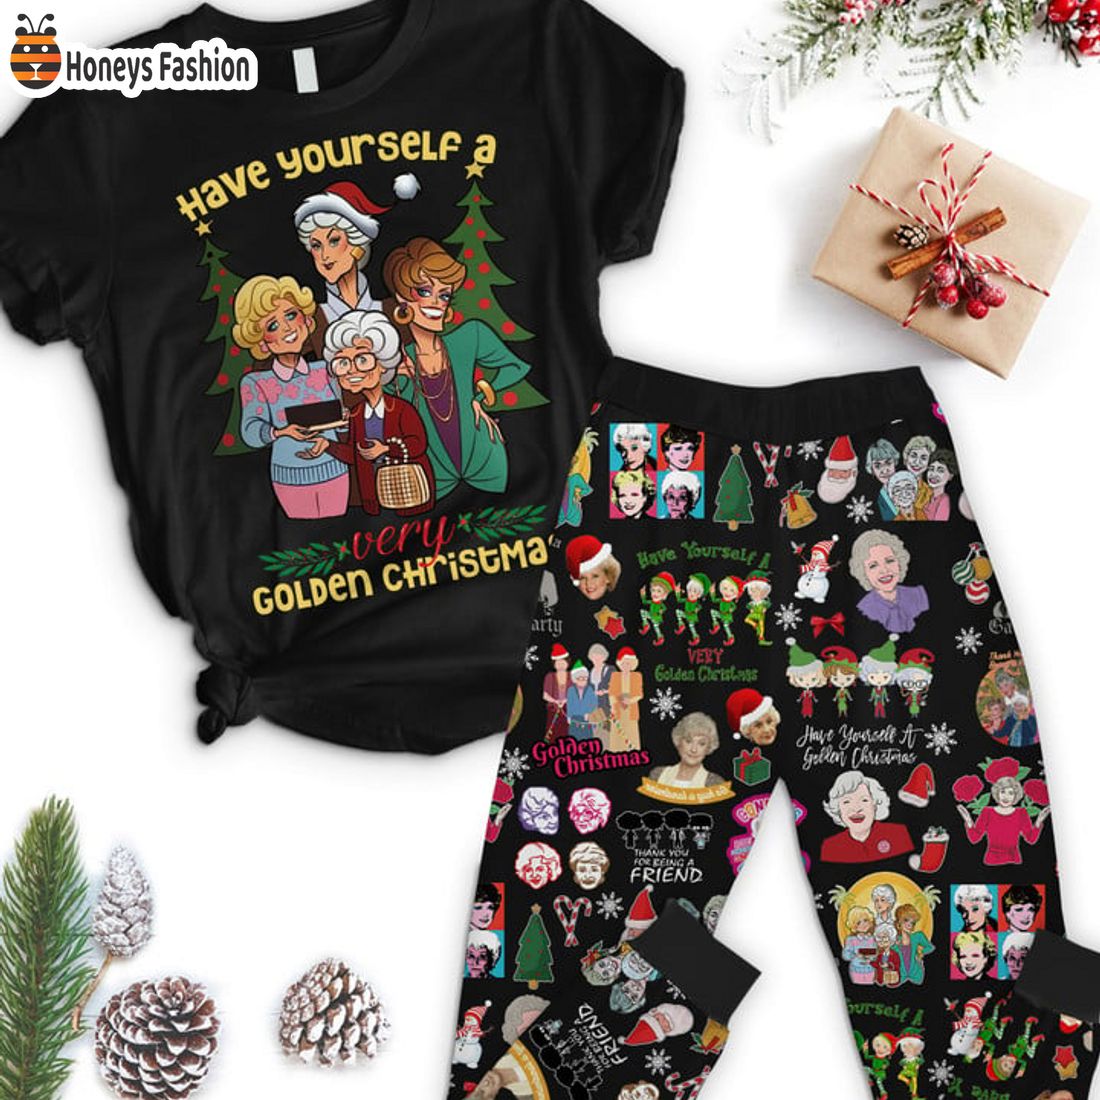 TRENDING The Golden Girl Have Yourself A Golden Christmas Pajamas Set